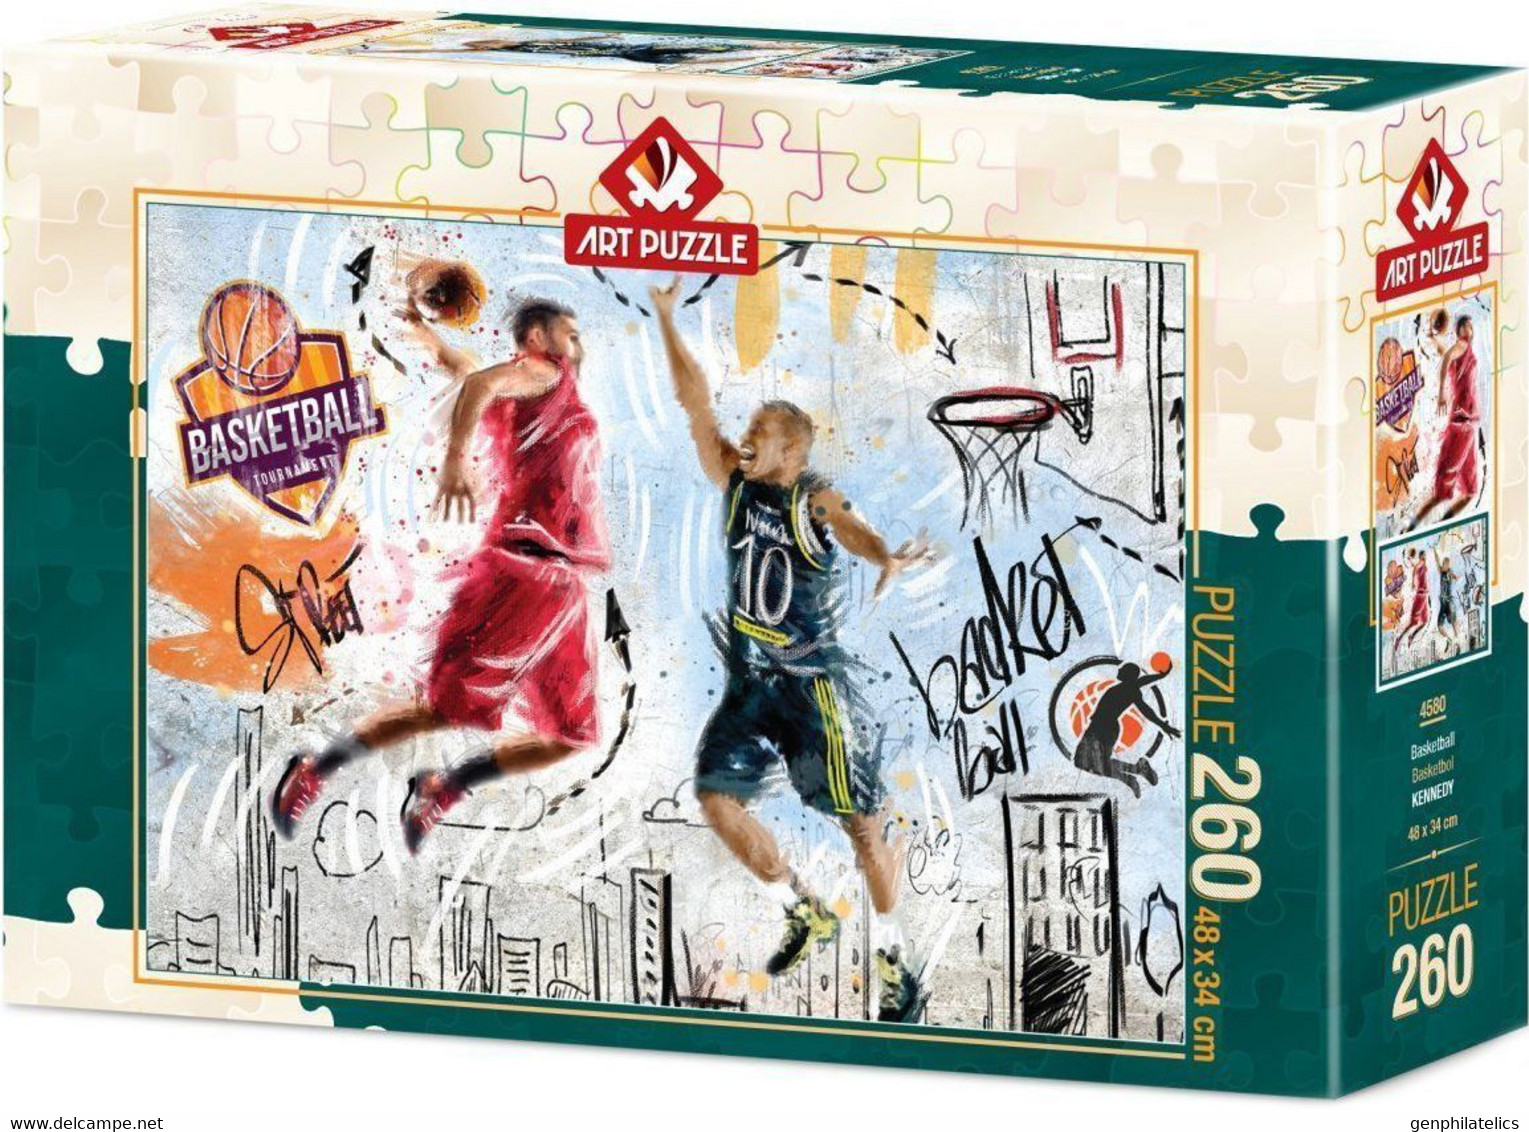 NEW Art Puzzle Jigsaw Puzzle 260 Tiles Pieces "Basketball" - Puzzles